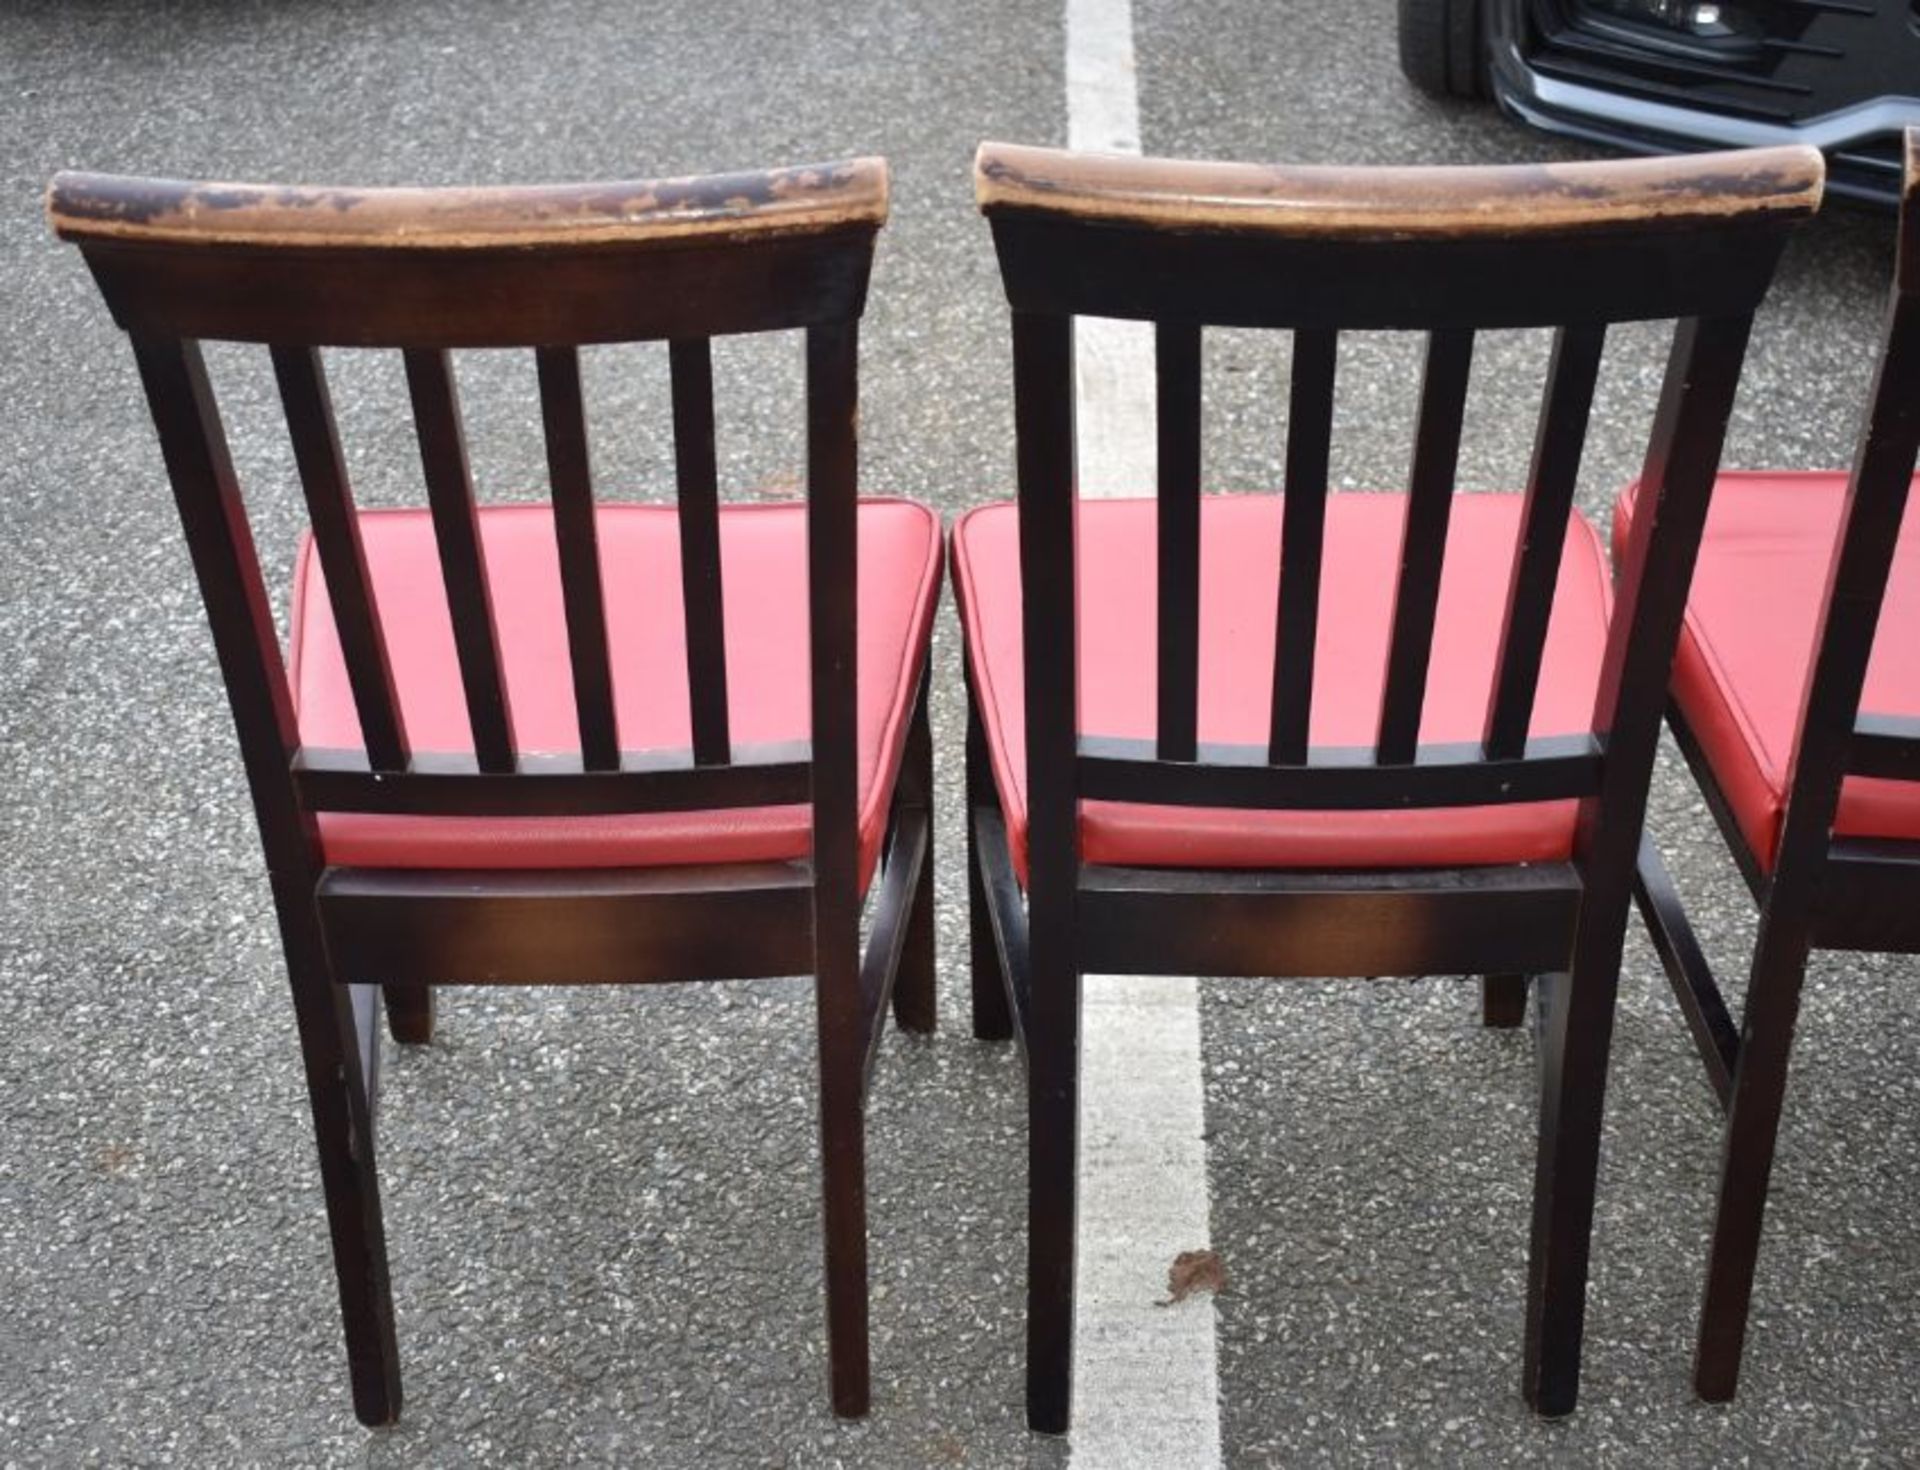 8 x Restaurant Dining Chairs With Dark Stained Wood Finish and Red Leather Seat Pads - Recently Remo - Image 3 of 6